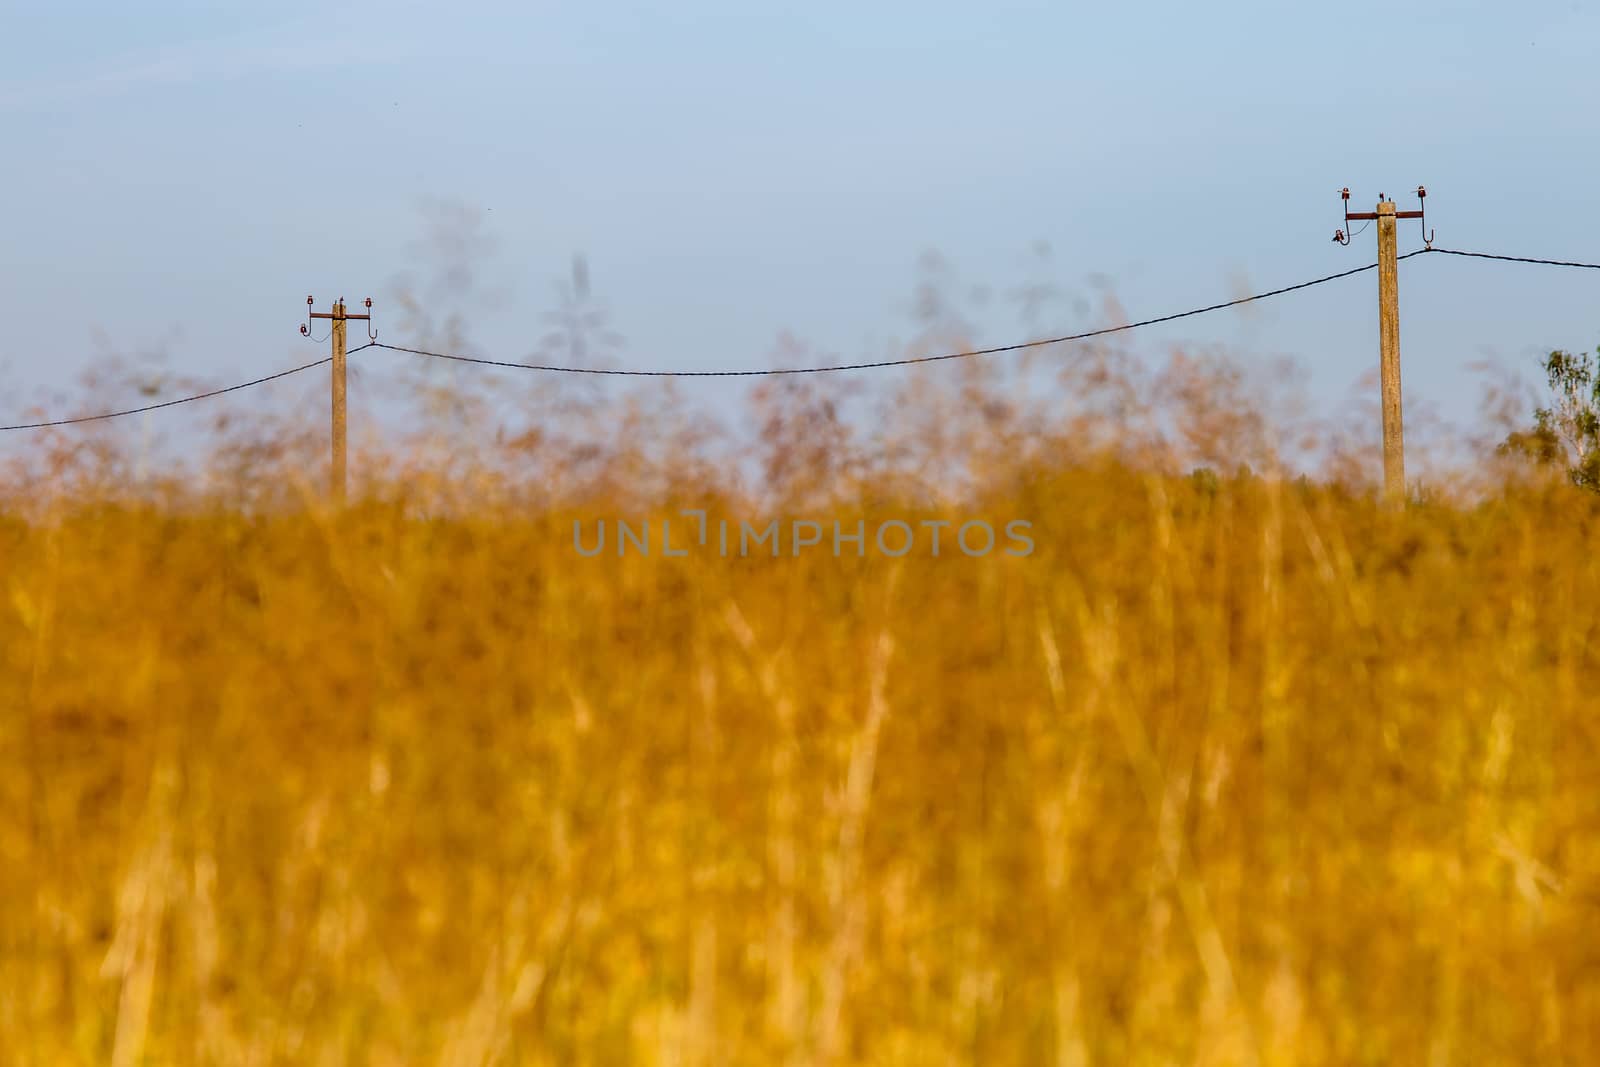 Summer landscape with cornfield and blue sky. Classic rural landscape in Latvia. Yellow cornfield. Blue sky and electricity poles. Focus on electric poles.